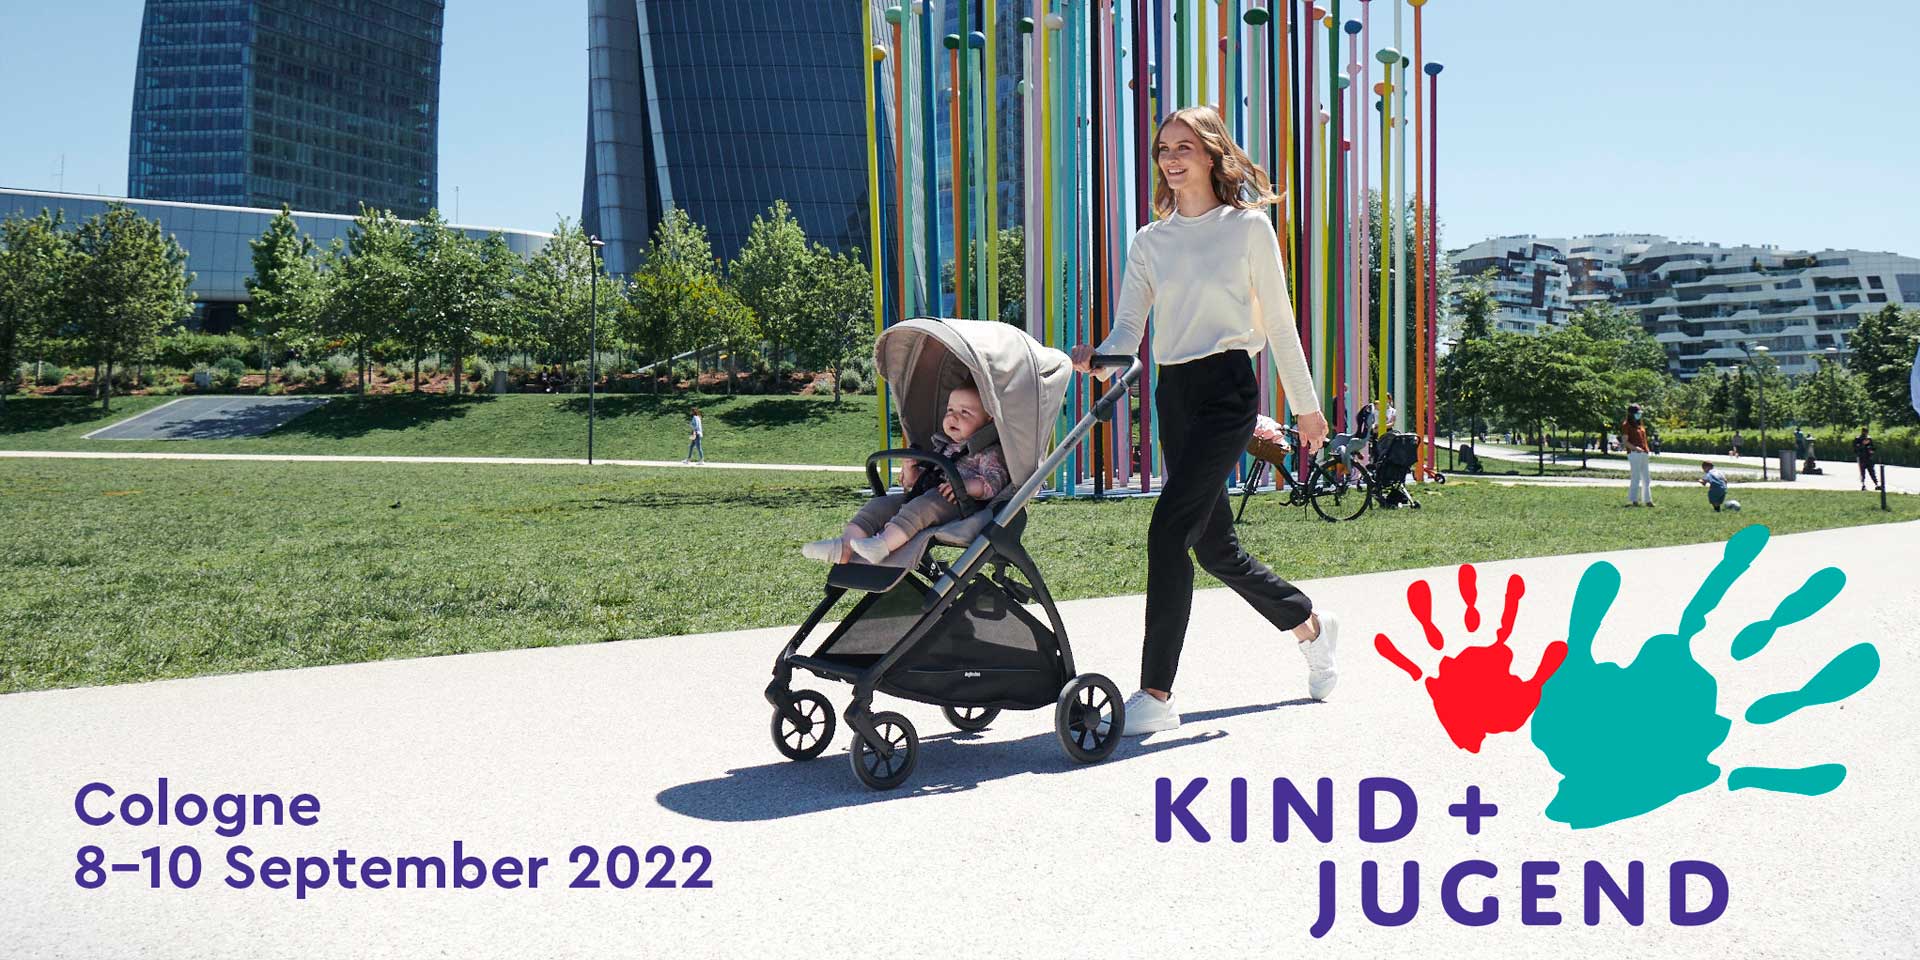 Kind + Jugend: The fair for children’s products